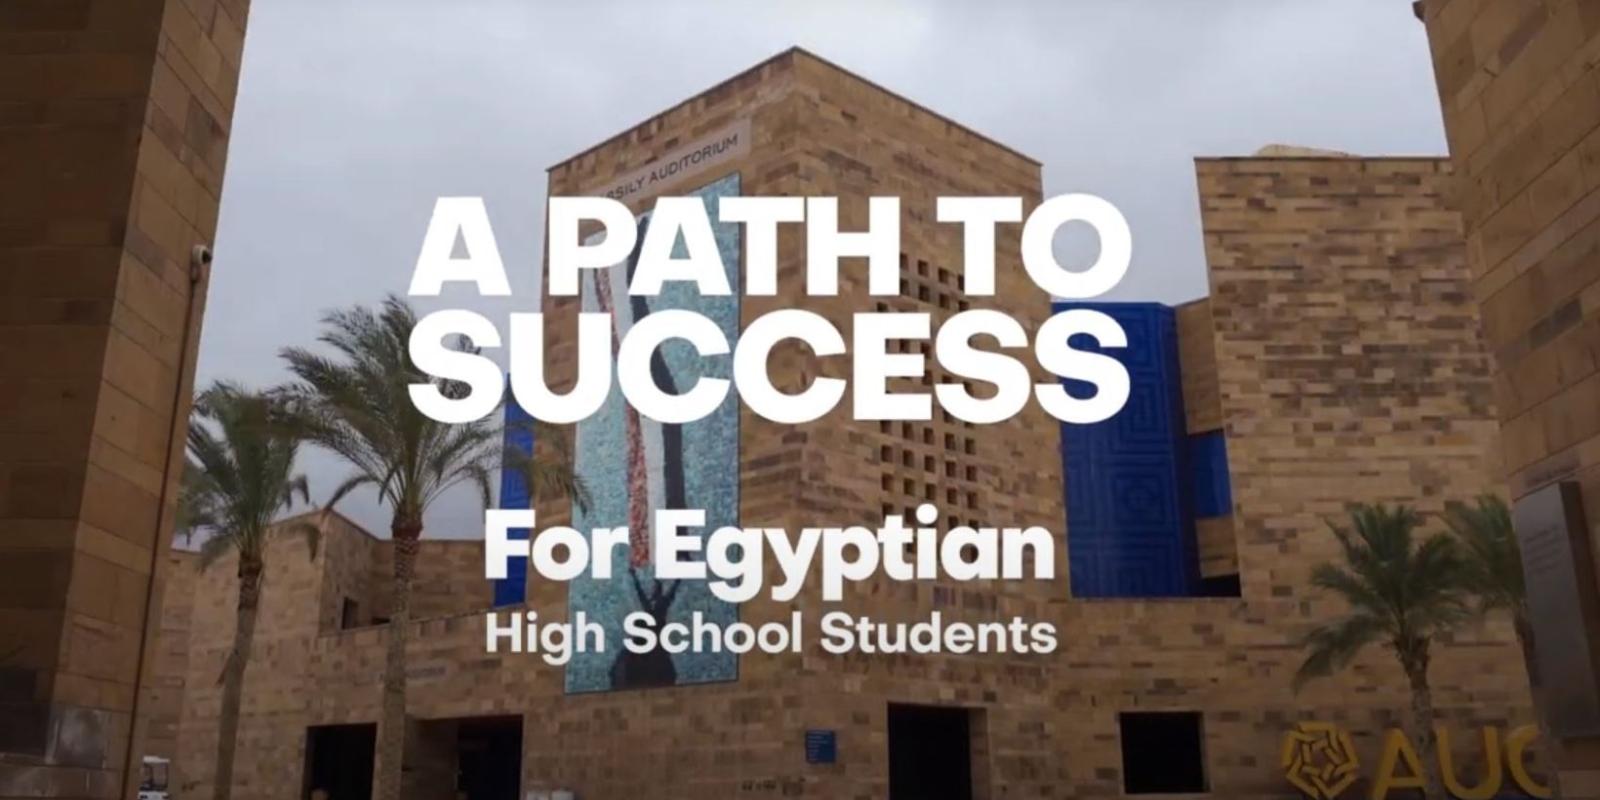 A photo of campus with the text "A path to success for Egyptian high school students"